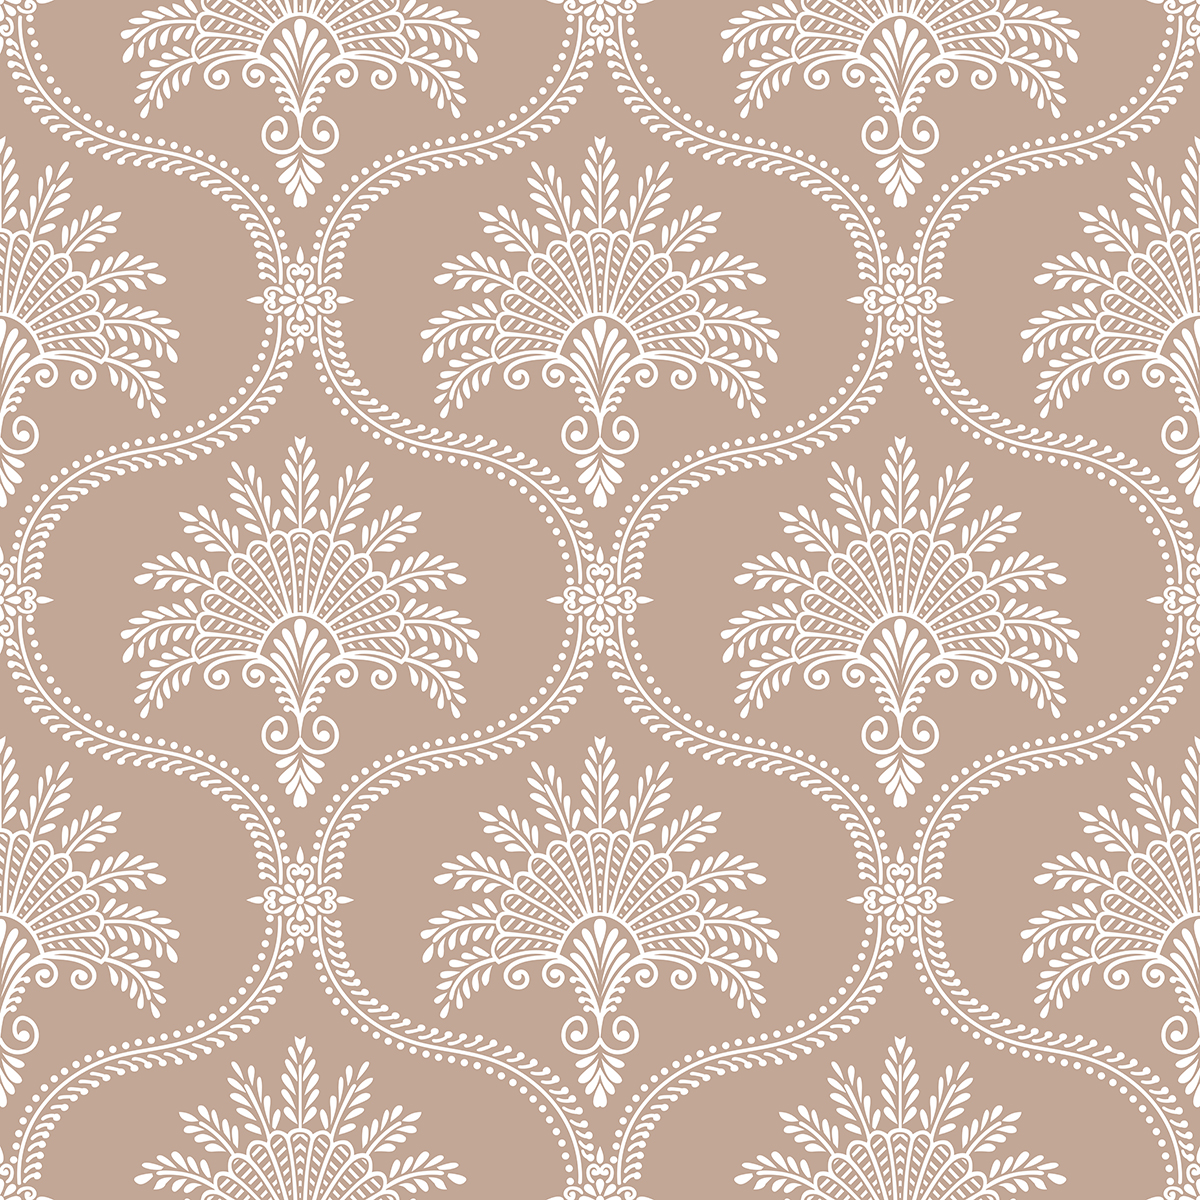 A pattern of white and pink flowers